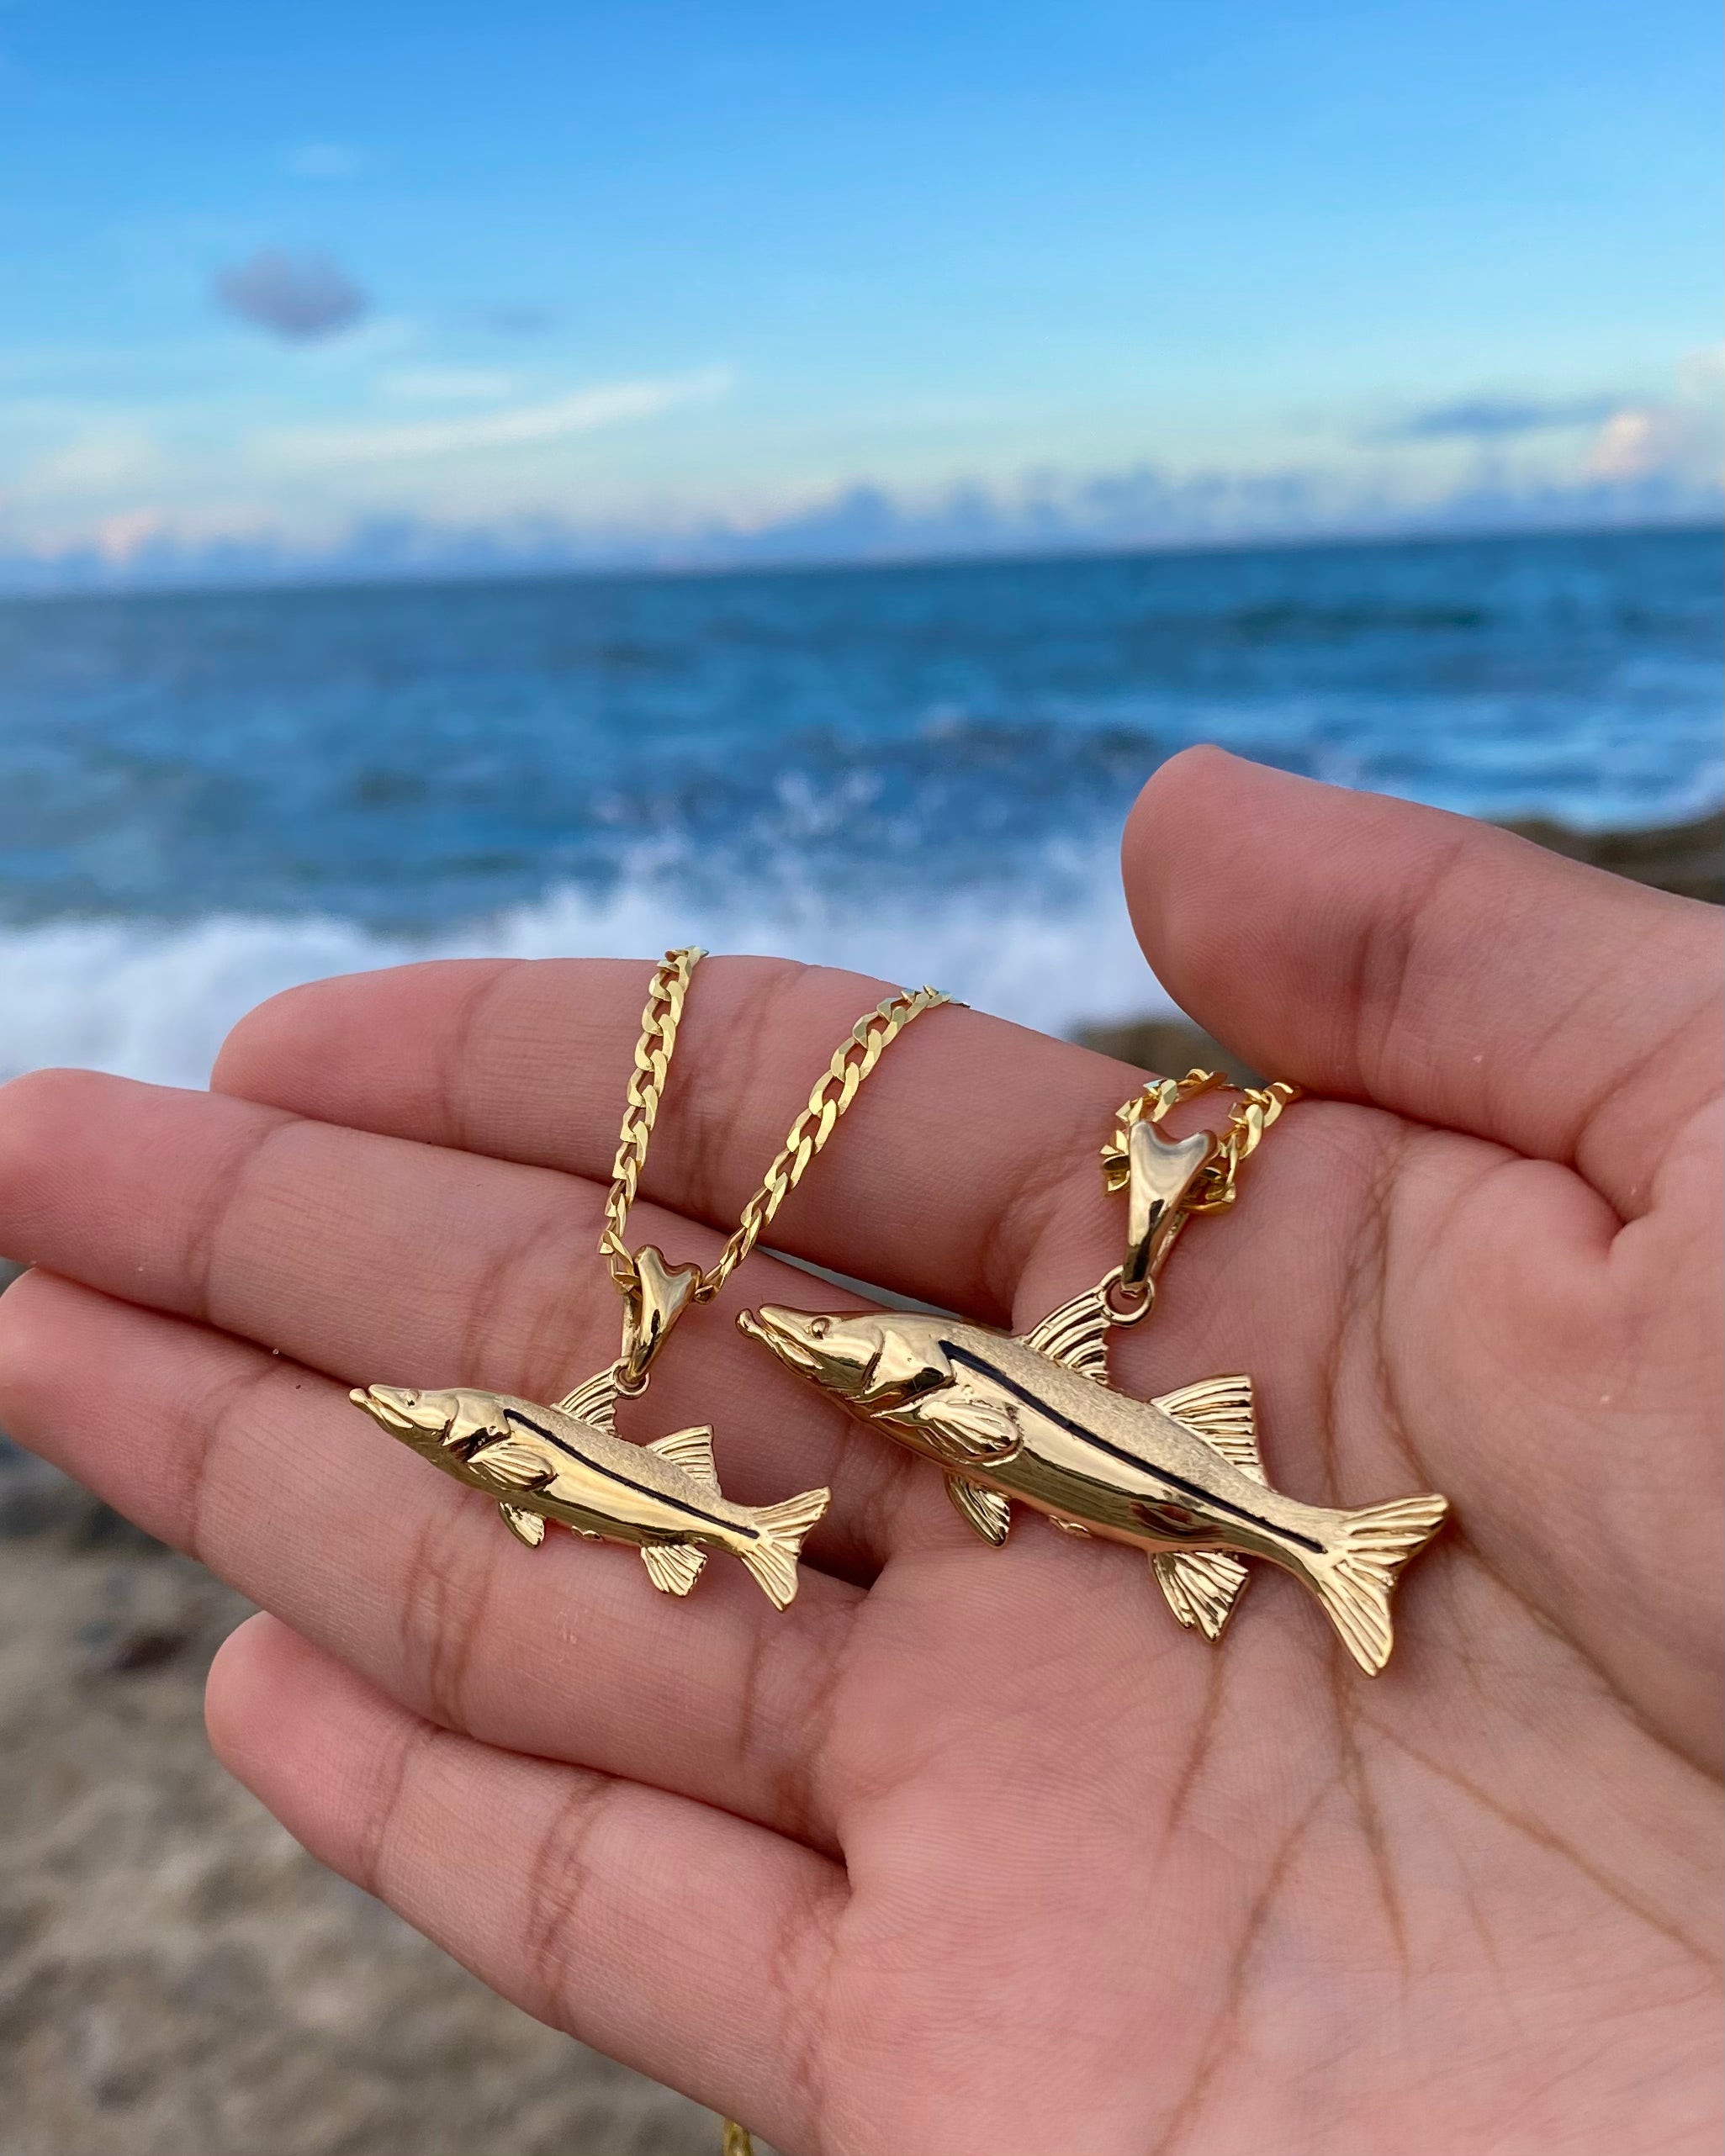 Standard and Small size Snook necklaces in gold by Castil.